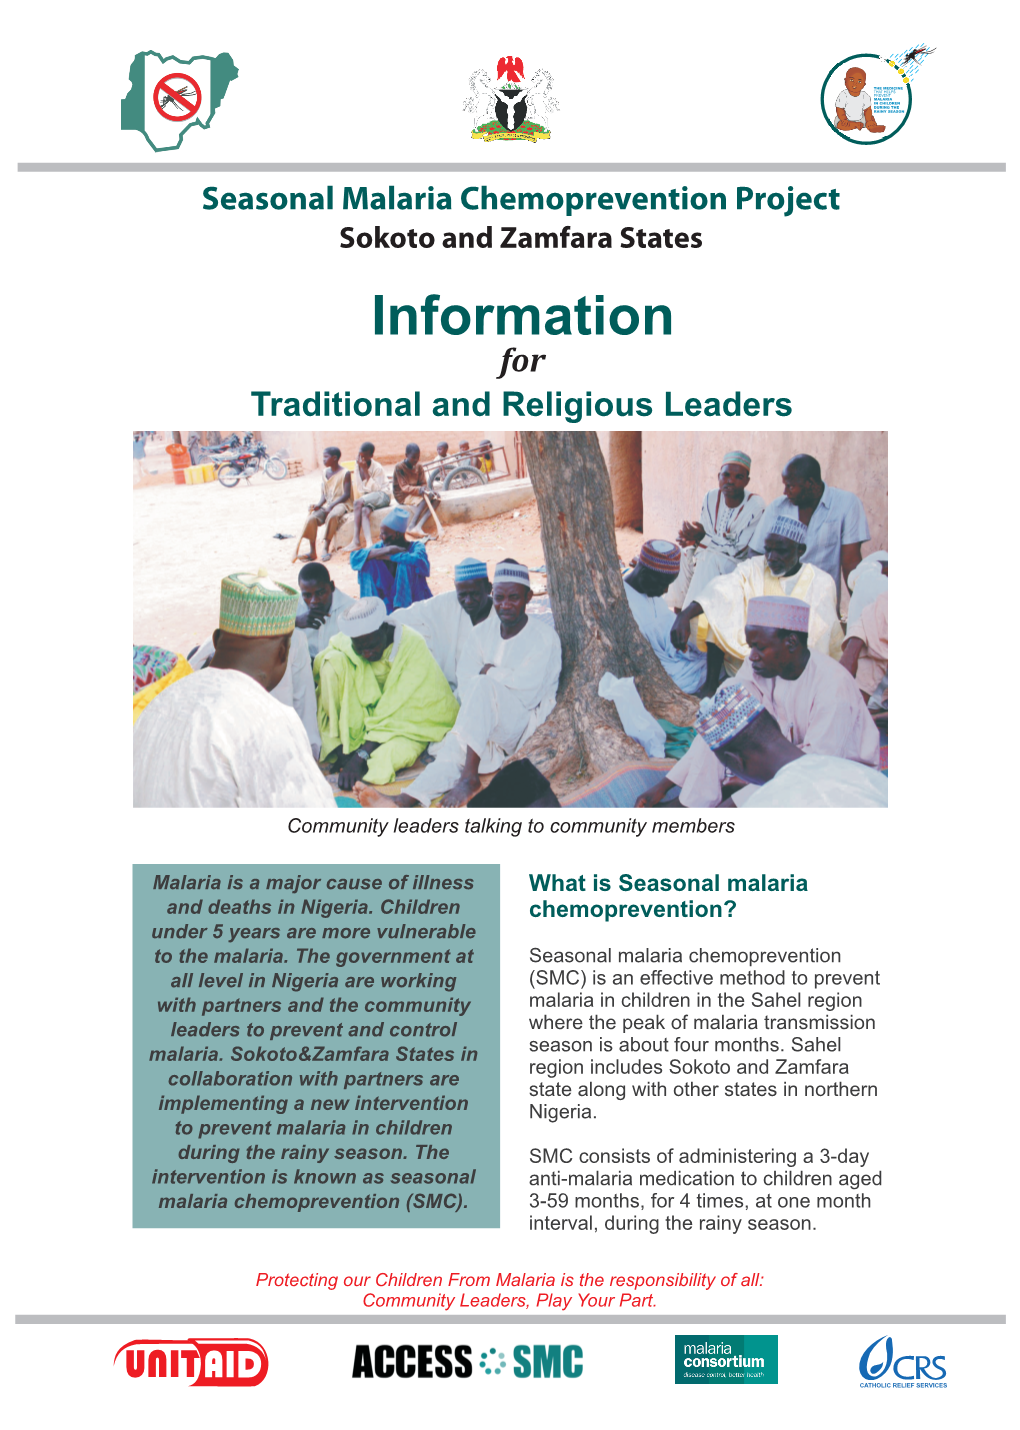 Information for Trad & Rel Leaders